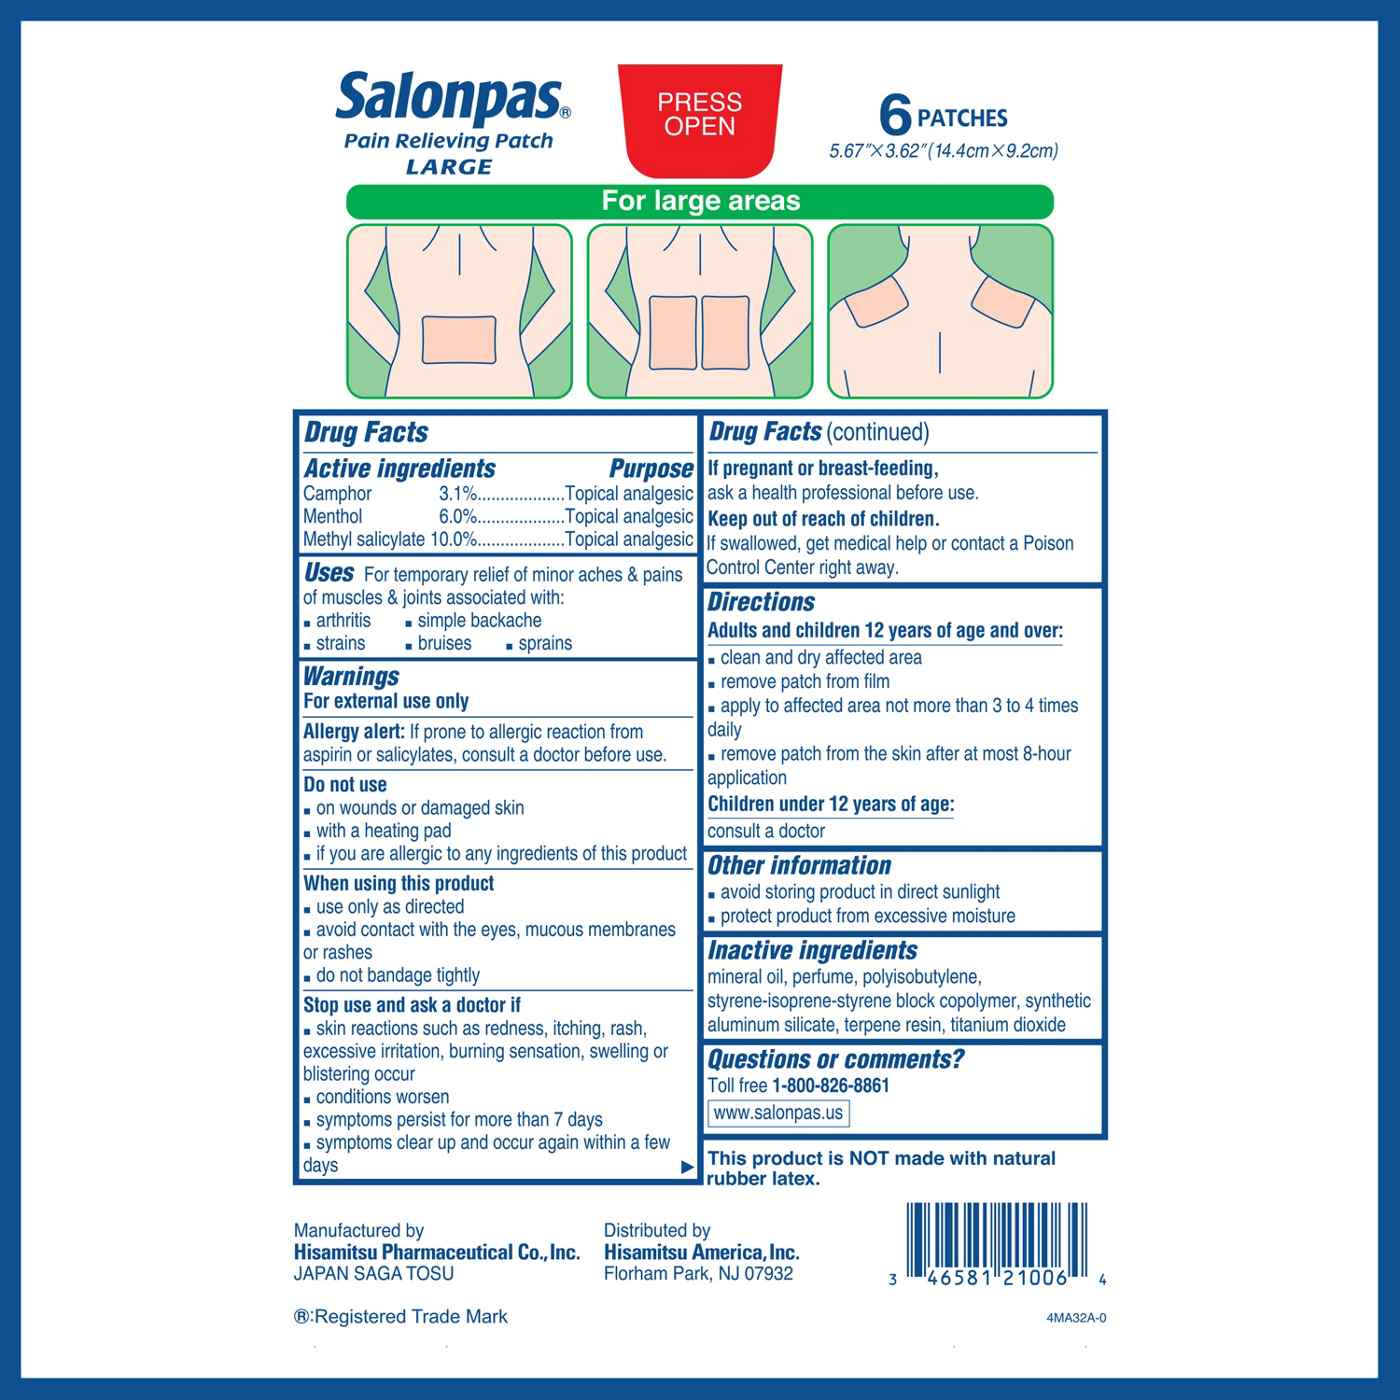 Salonpas Pain Relieving Patch, Large; image 3 of 6